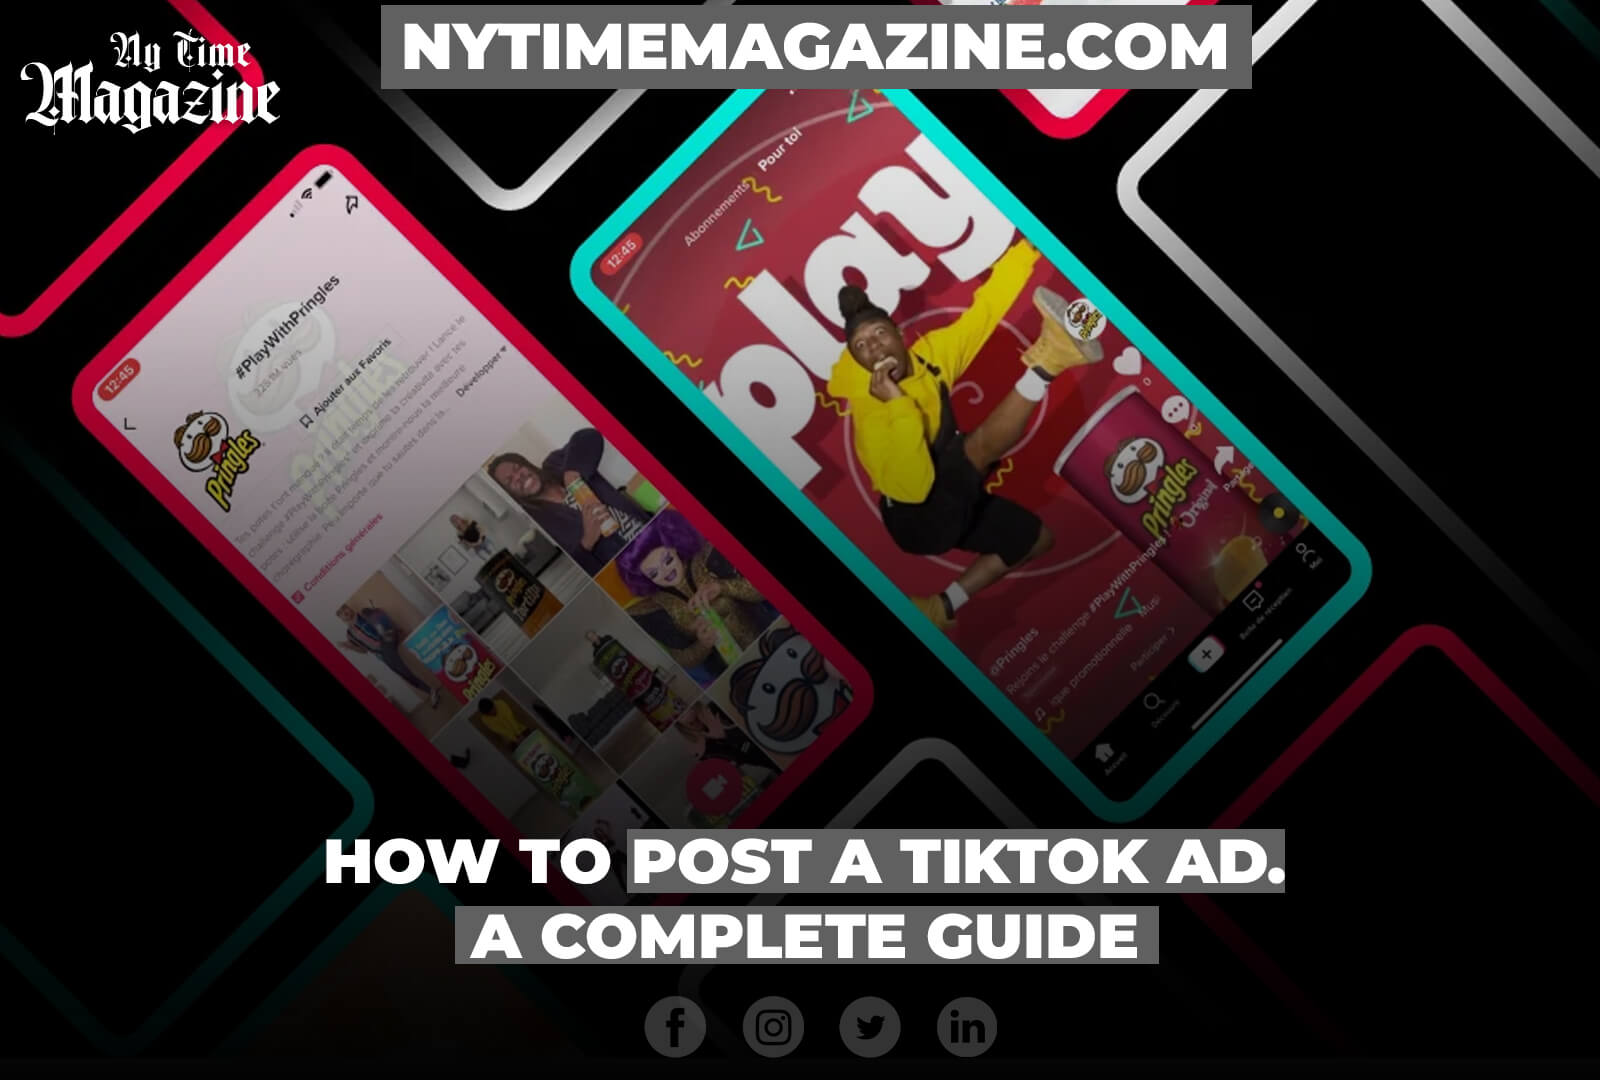 How to Post a TikTok Ad A Complete Guide